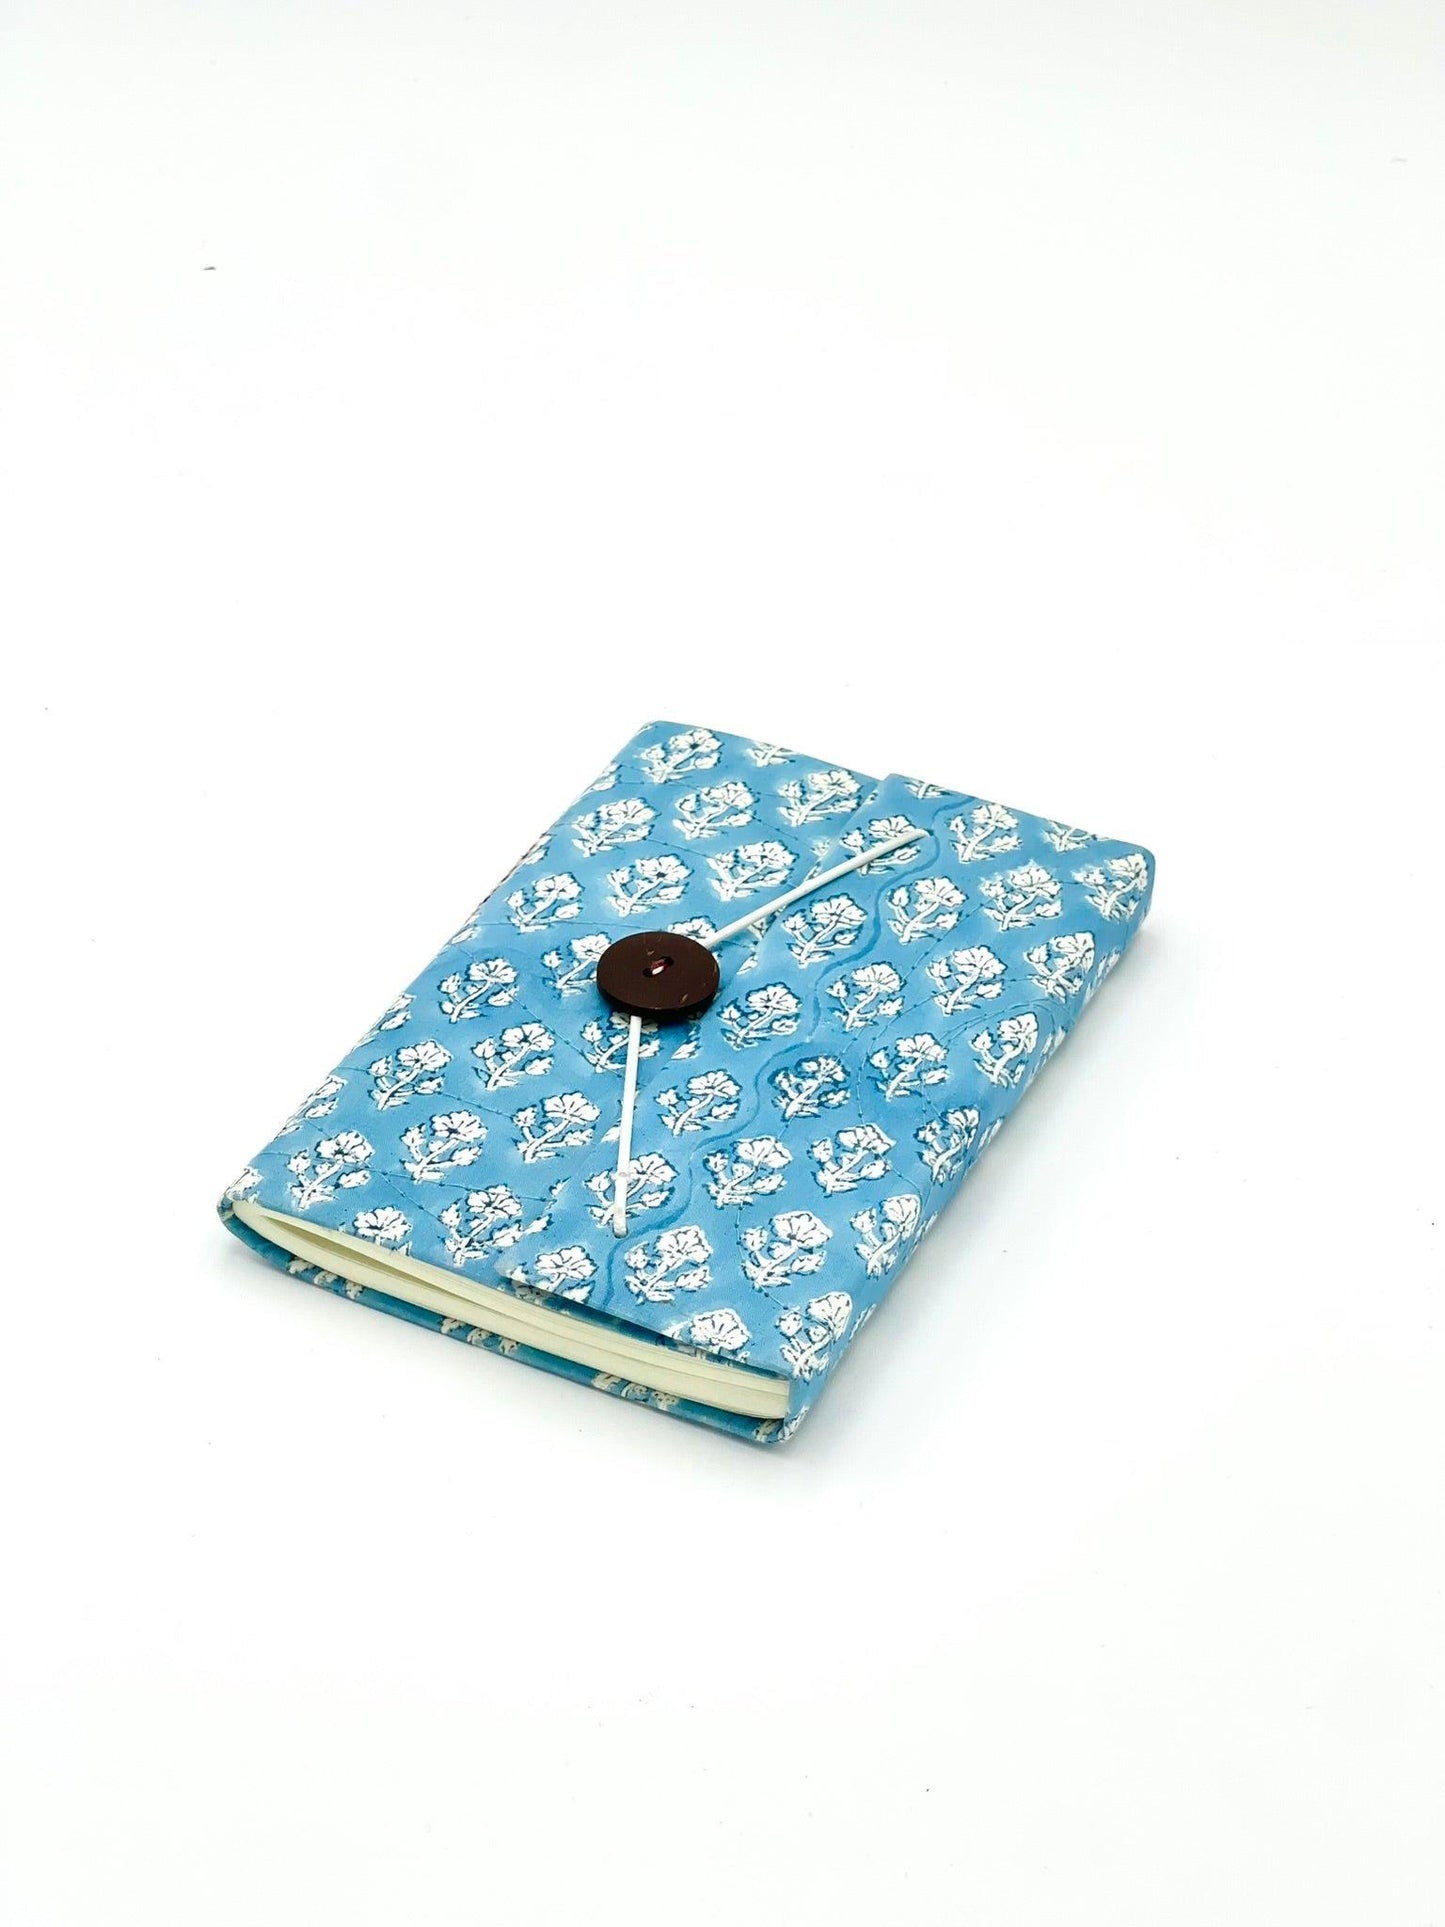 Block Print Journal/Notebook, Light Blue & White Floral - Unlined, 100 Pages, Thick Paper, Hard Cover - Transcend